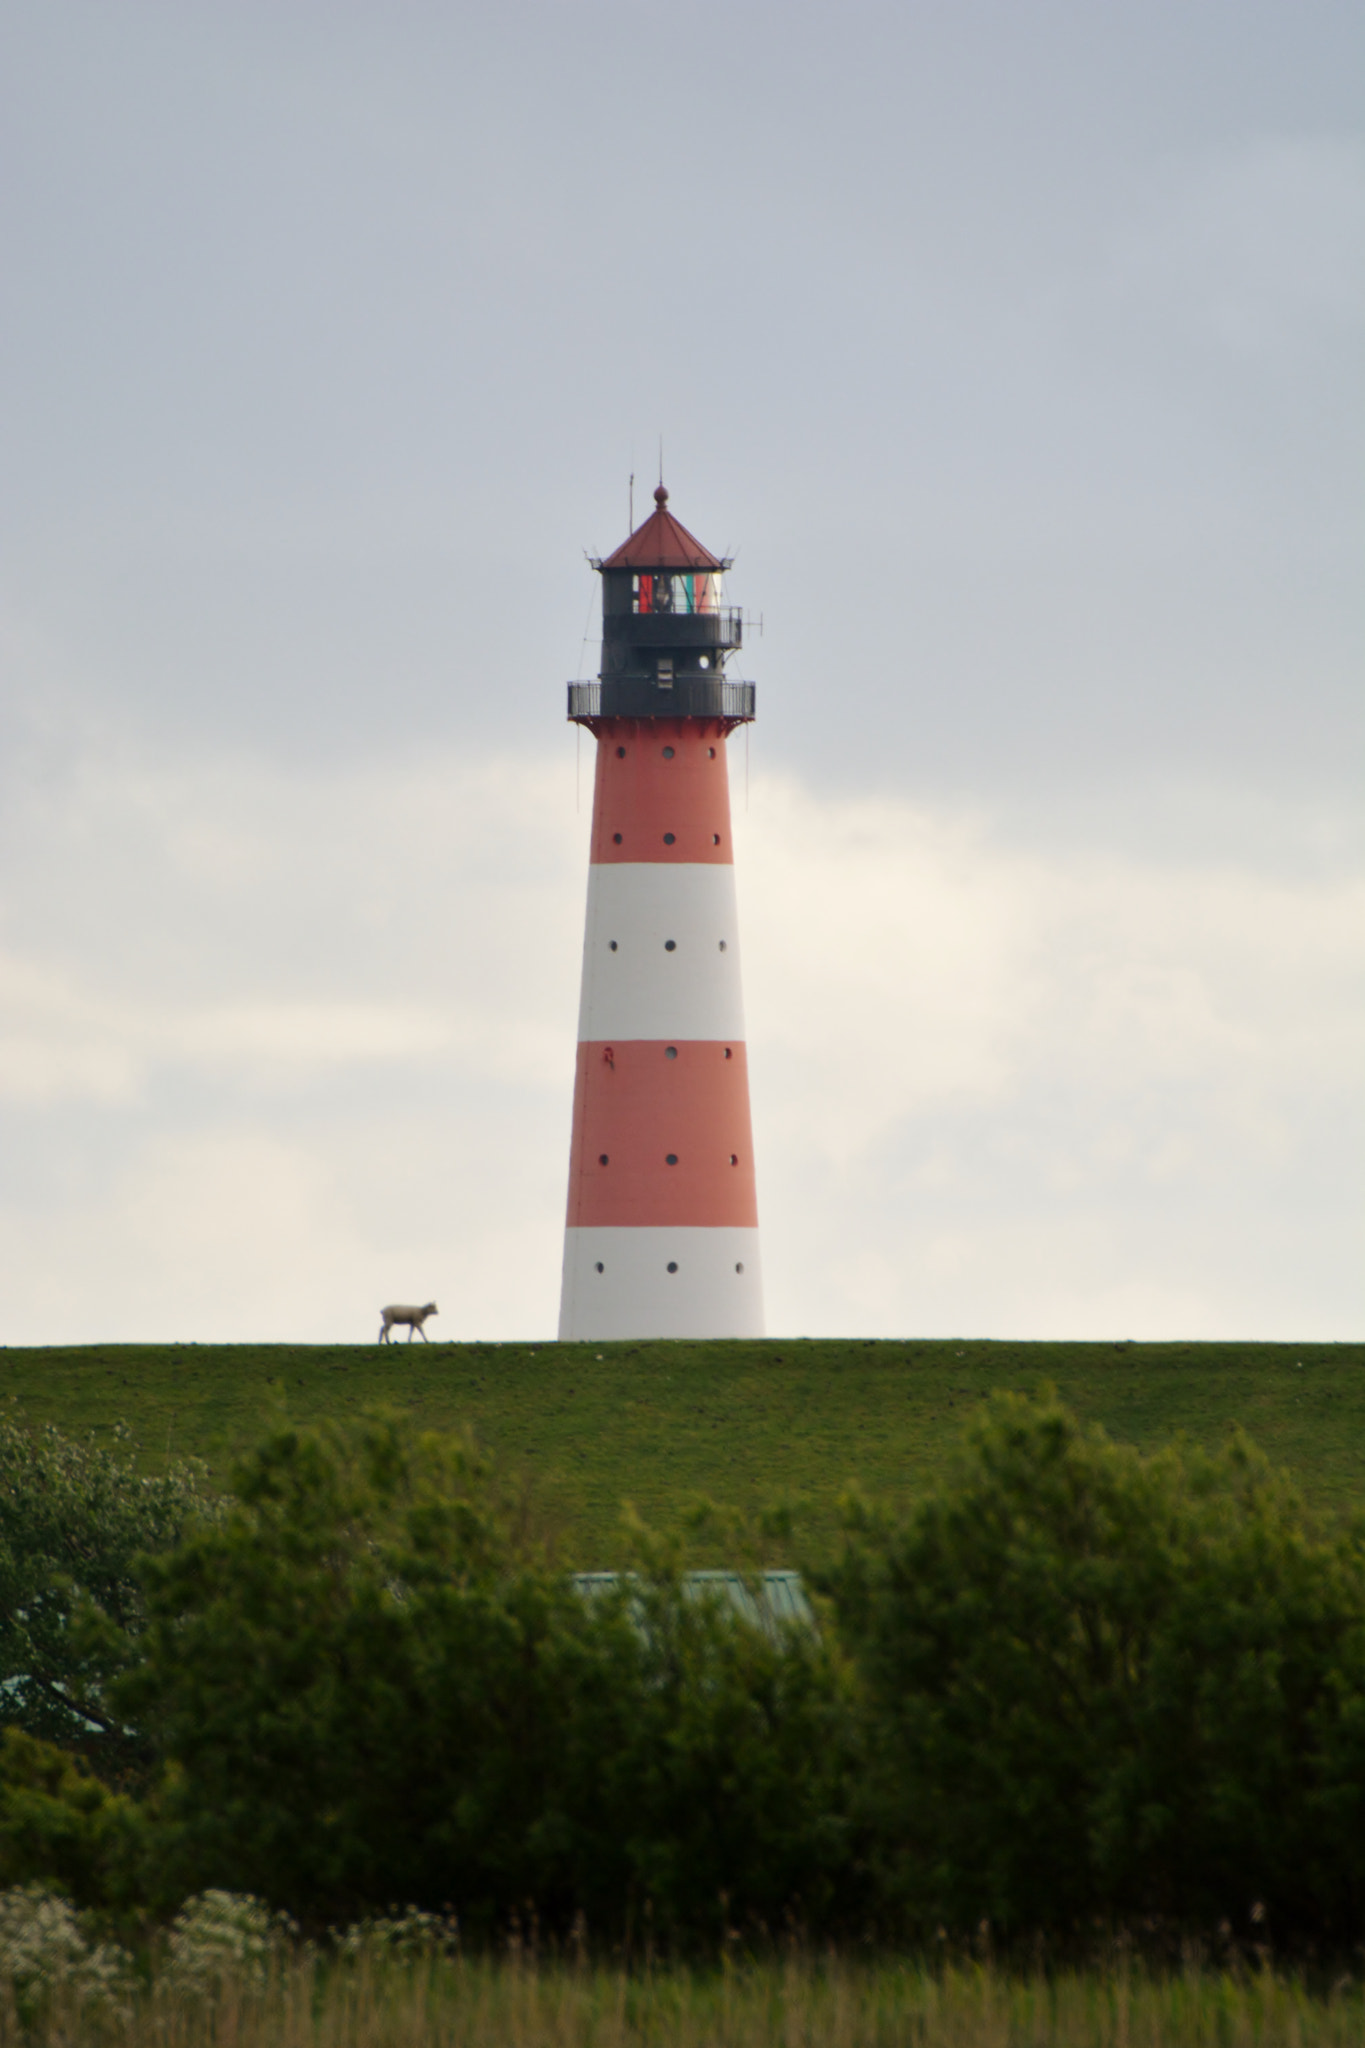 Nikon D7100 sample photo. The sheep and the lighthouse photography